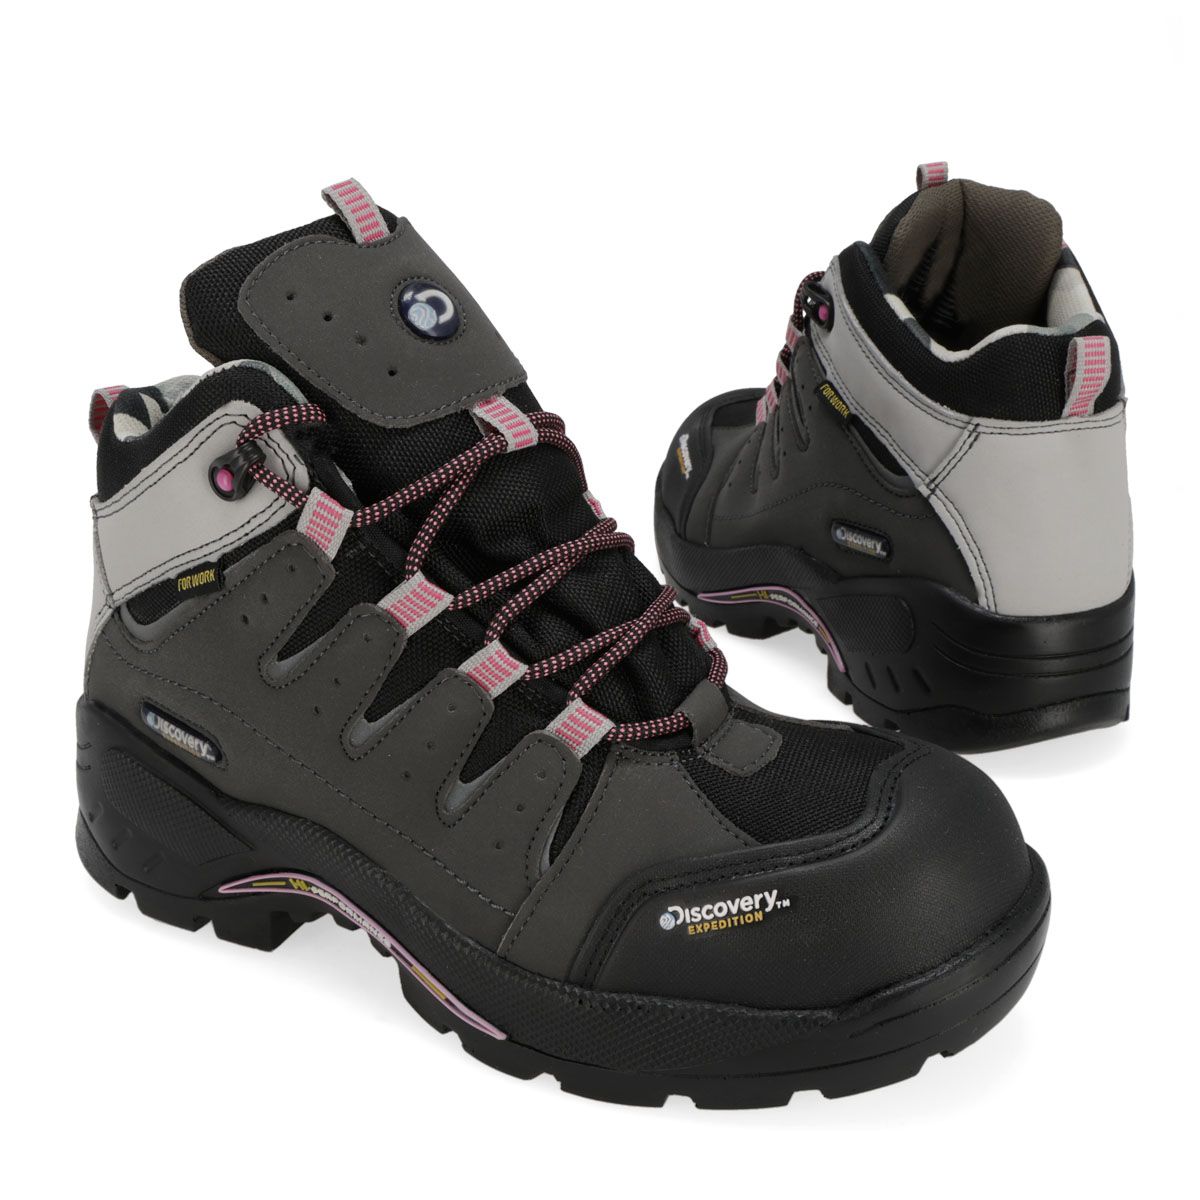 BOTA CASCO DIELECTRICO MUJER DISCOVERY 1958 GRIS/ROSA